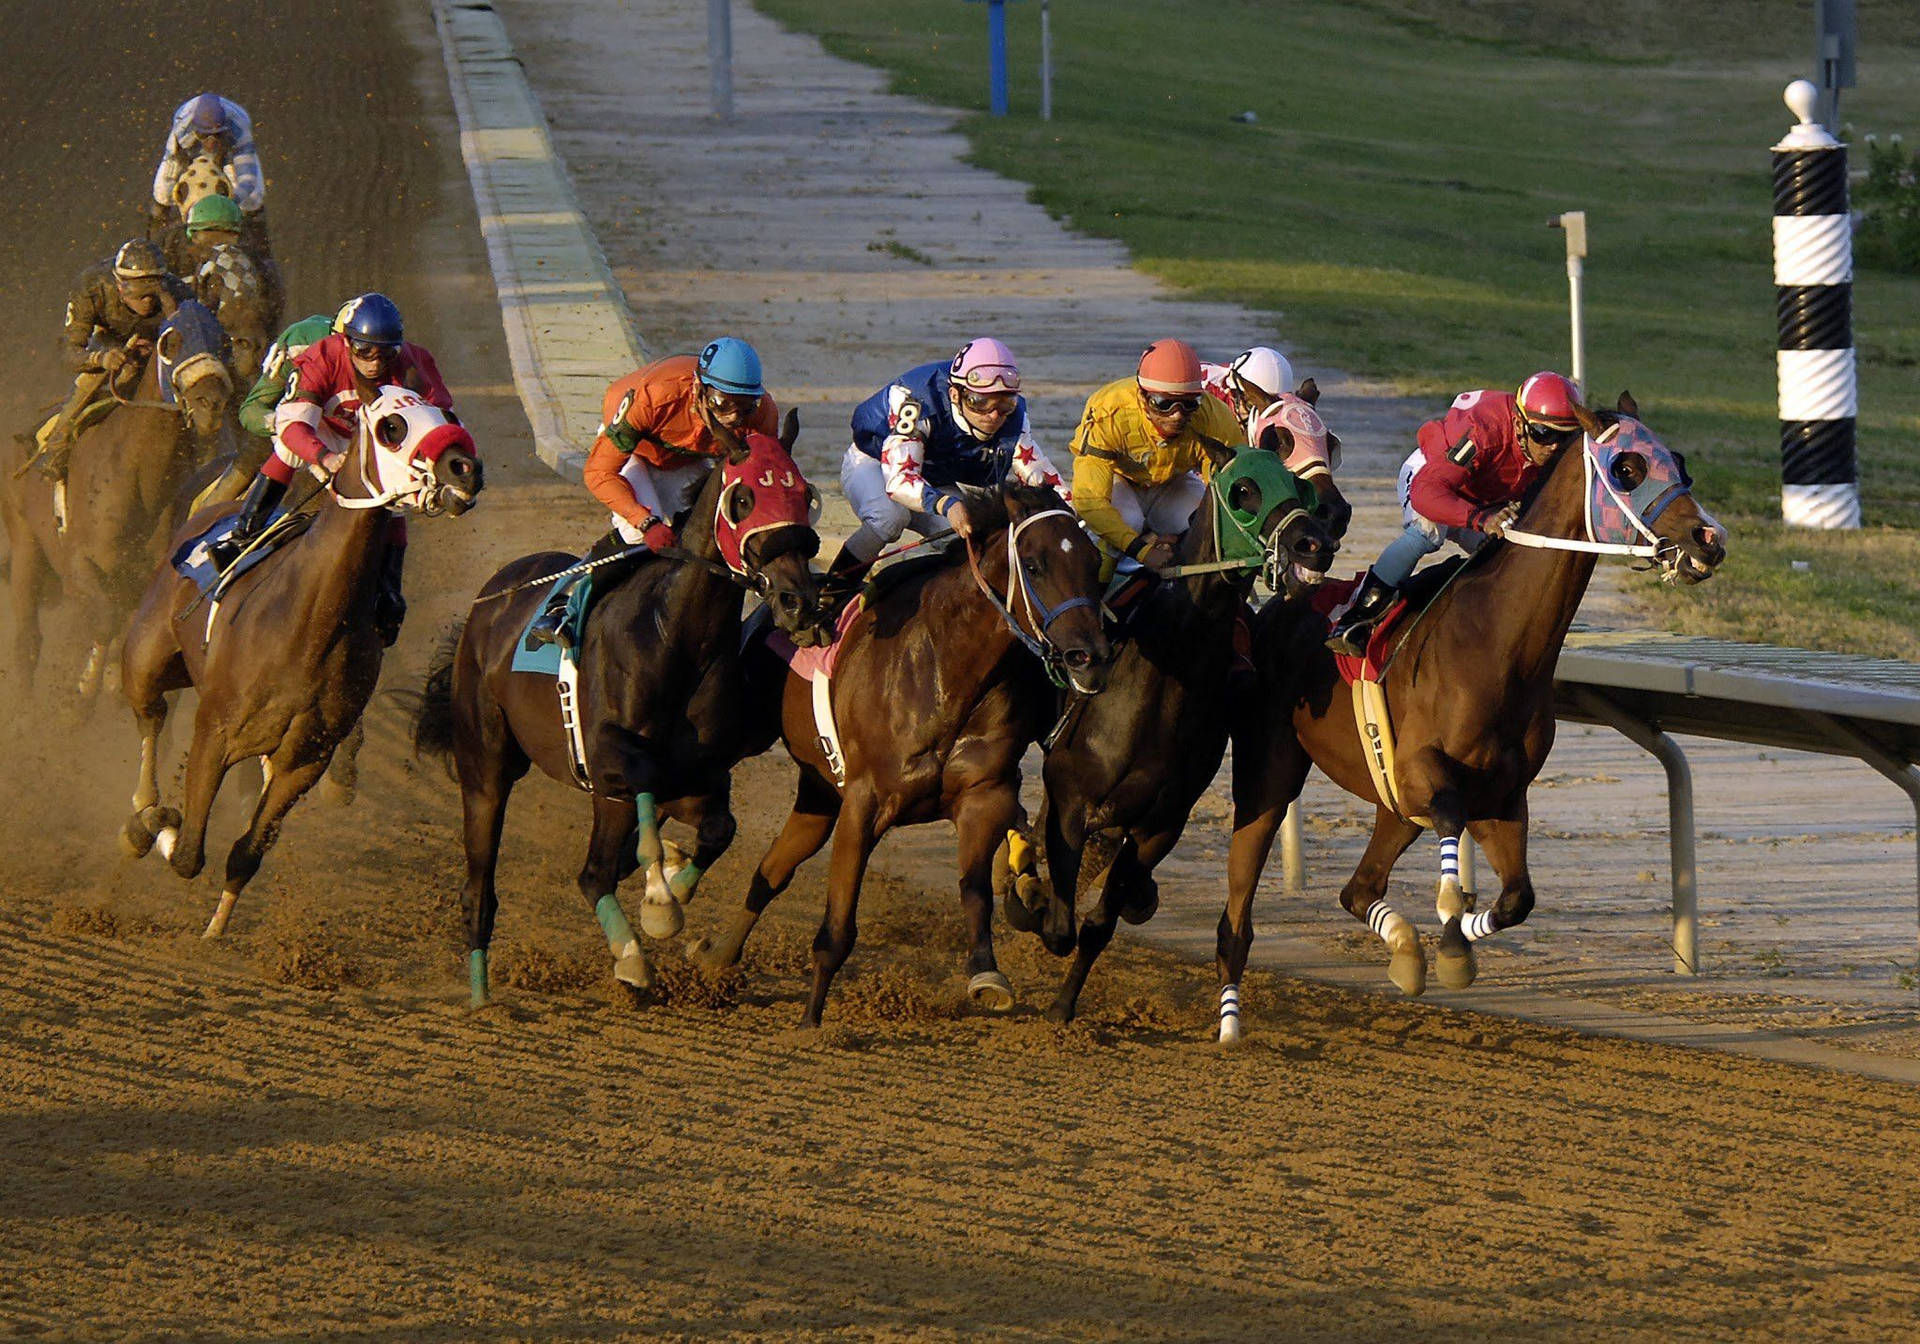 Free Horse Racing Wallpaper Downloads, [100+] Horse Racing Wallpapers for  FREE 